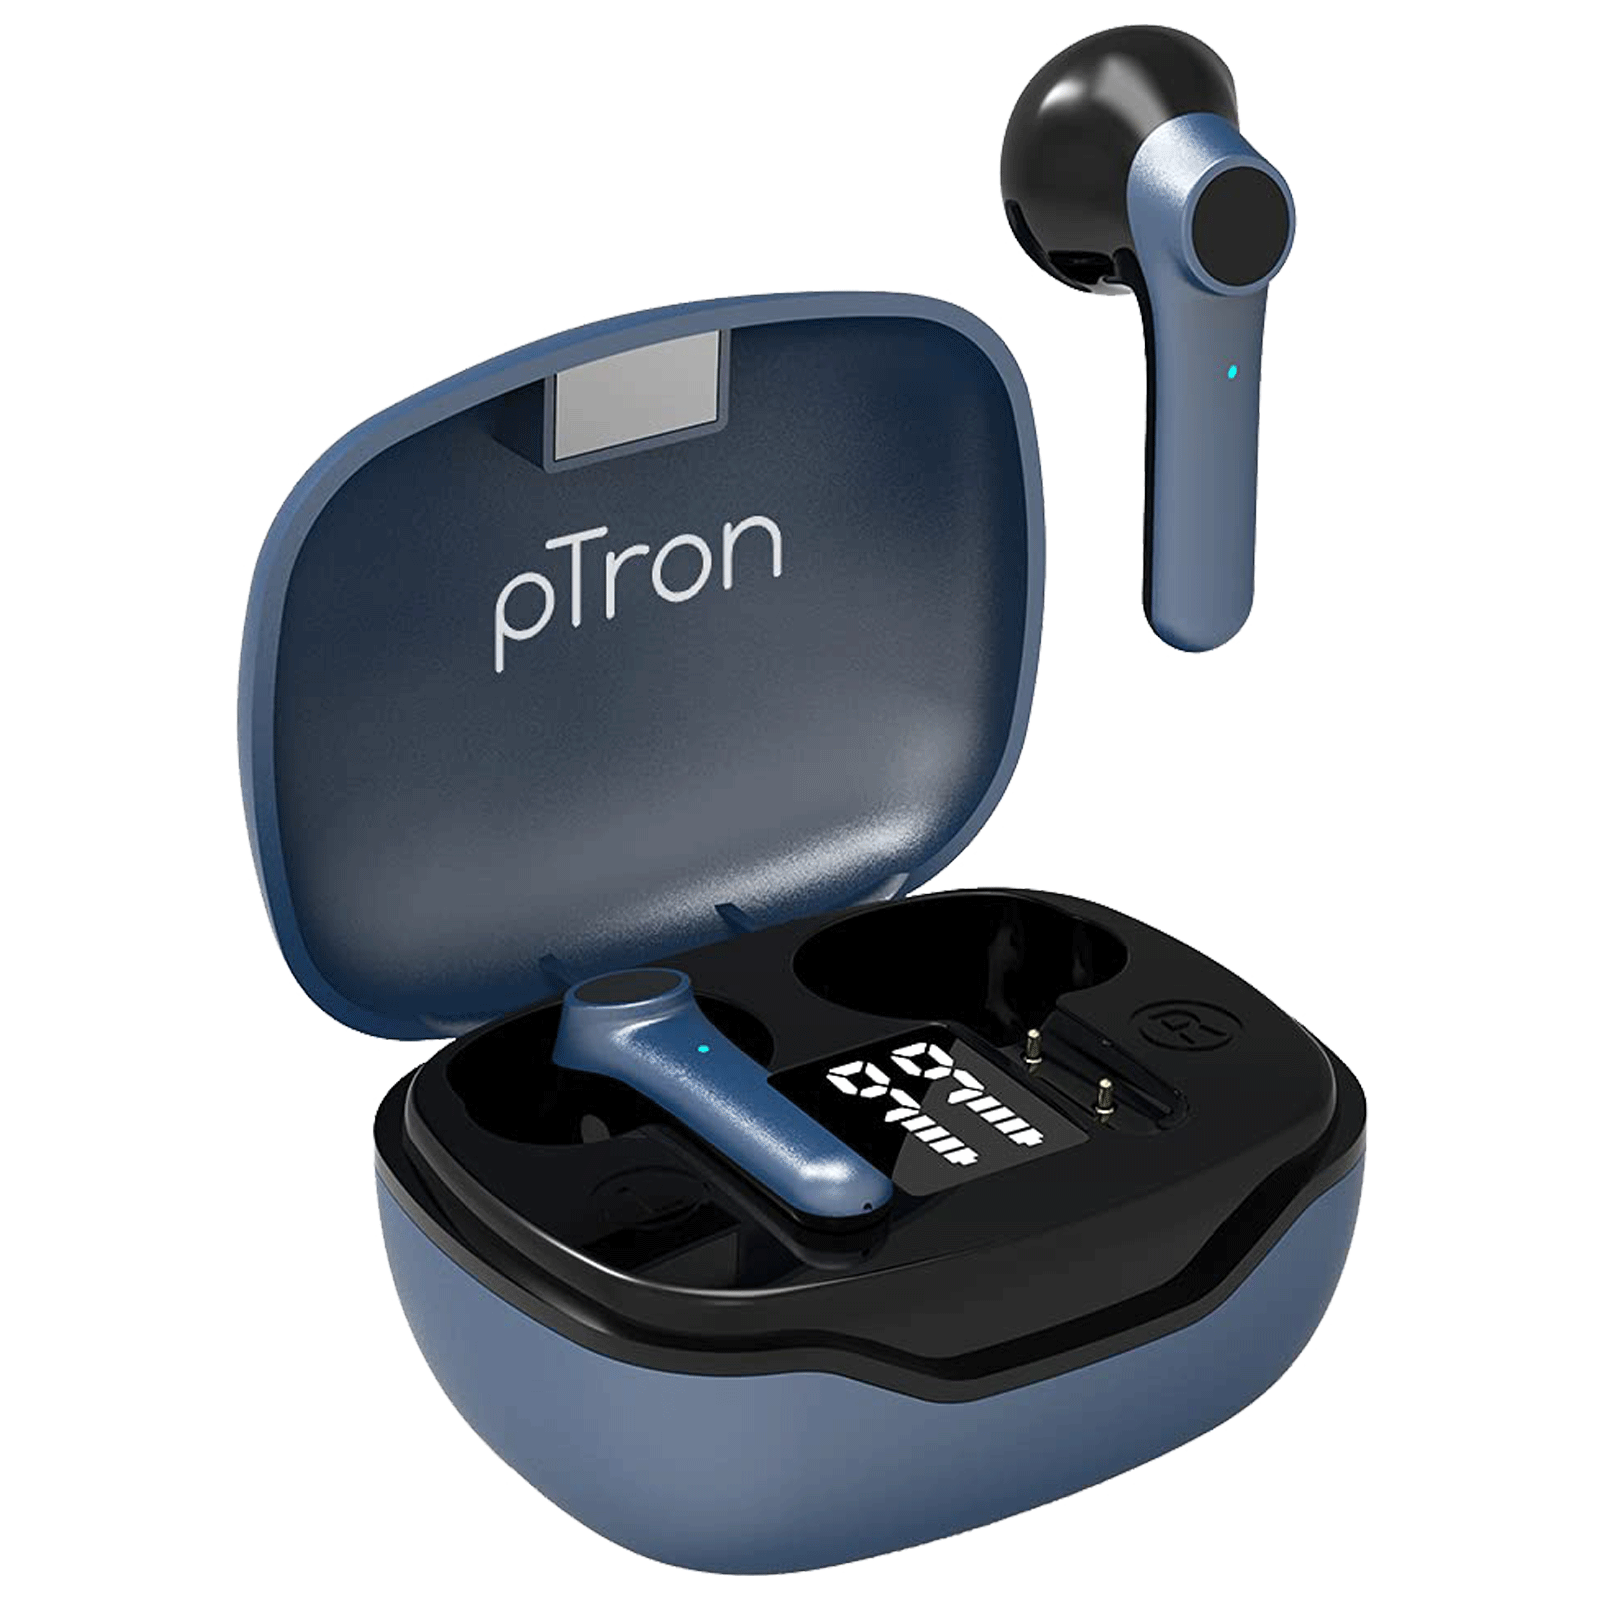 pTron Bass Pods 281 140317947 In-Ear Passive Noise Cancellation Truly Wireless Earbuds with Mic (Bluetooth 5.1, Sweat And Sweat Resistance, Blue)_1